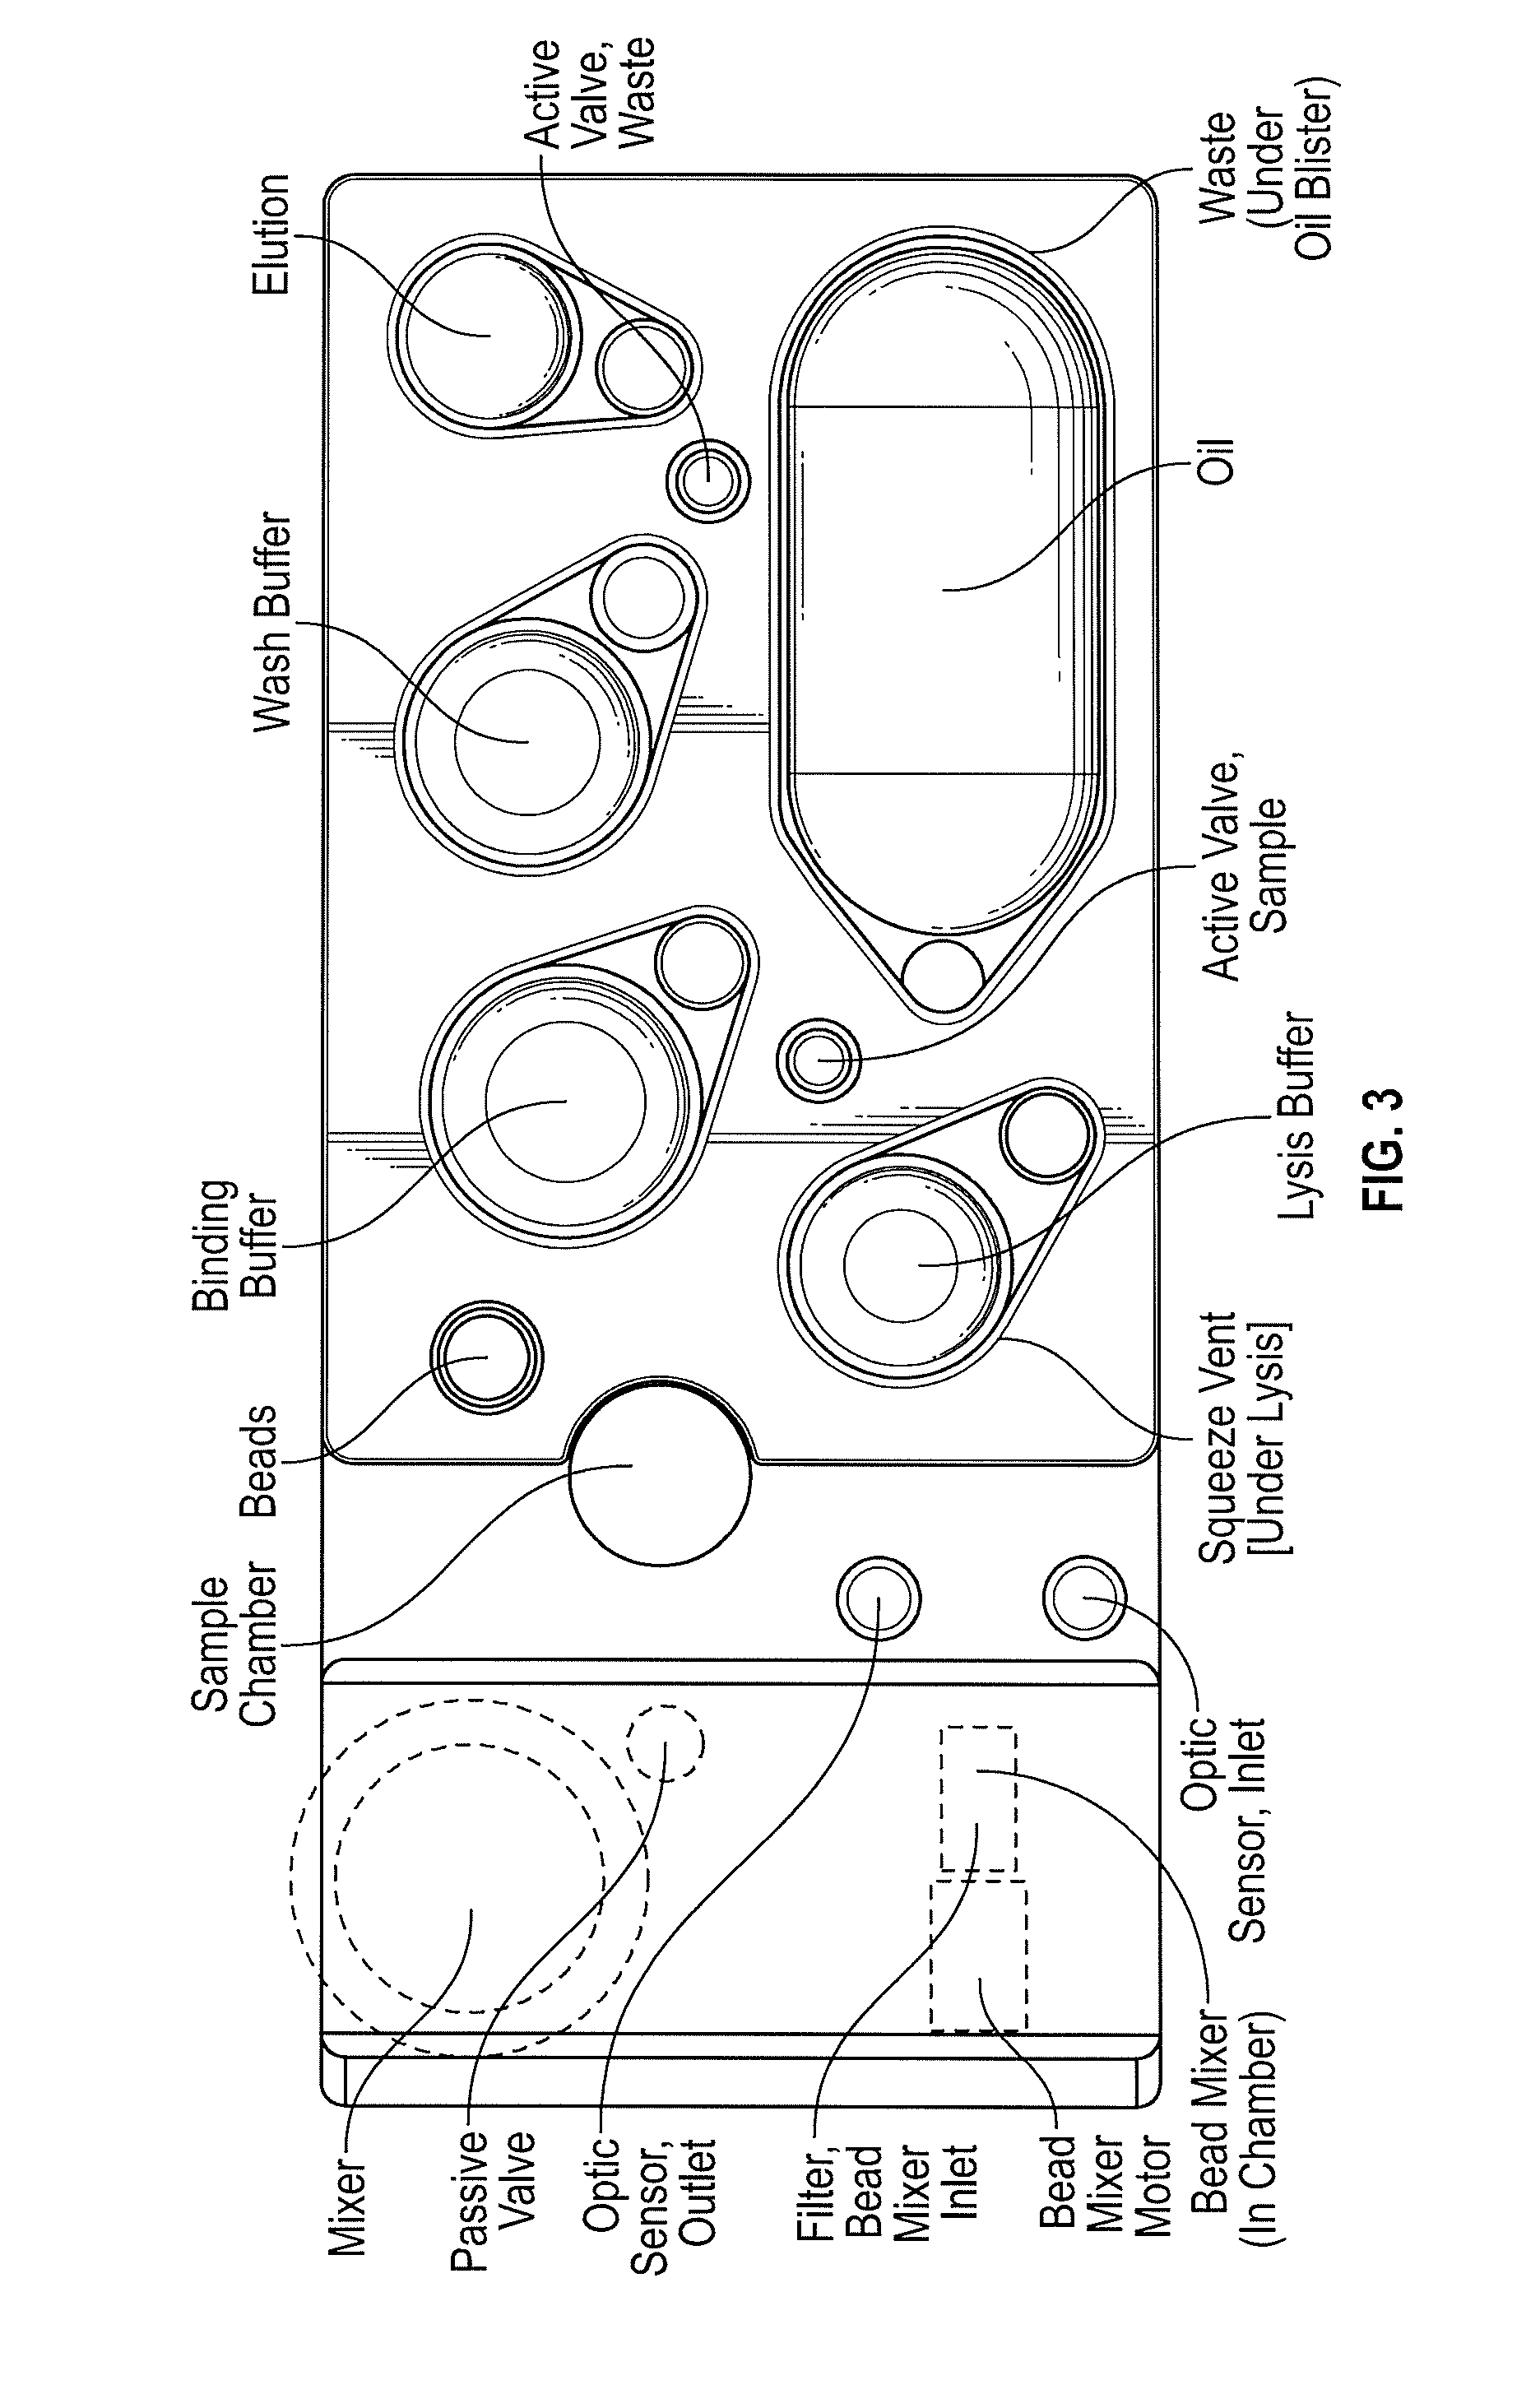 Instrument and cartridge for performing assays in a closed sample preparation and reaction system employing electrowetting fluid manipulation